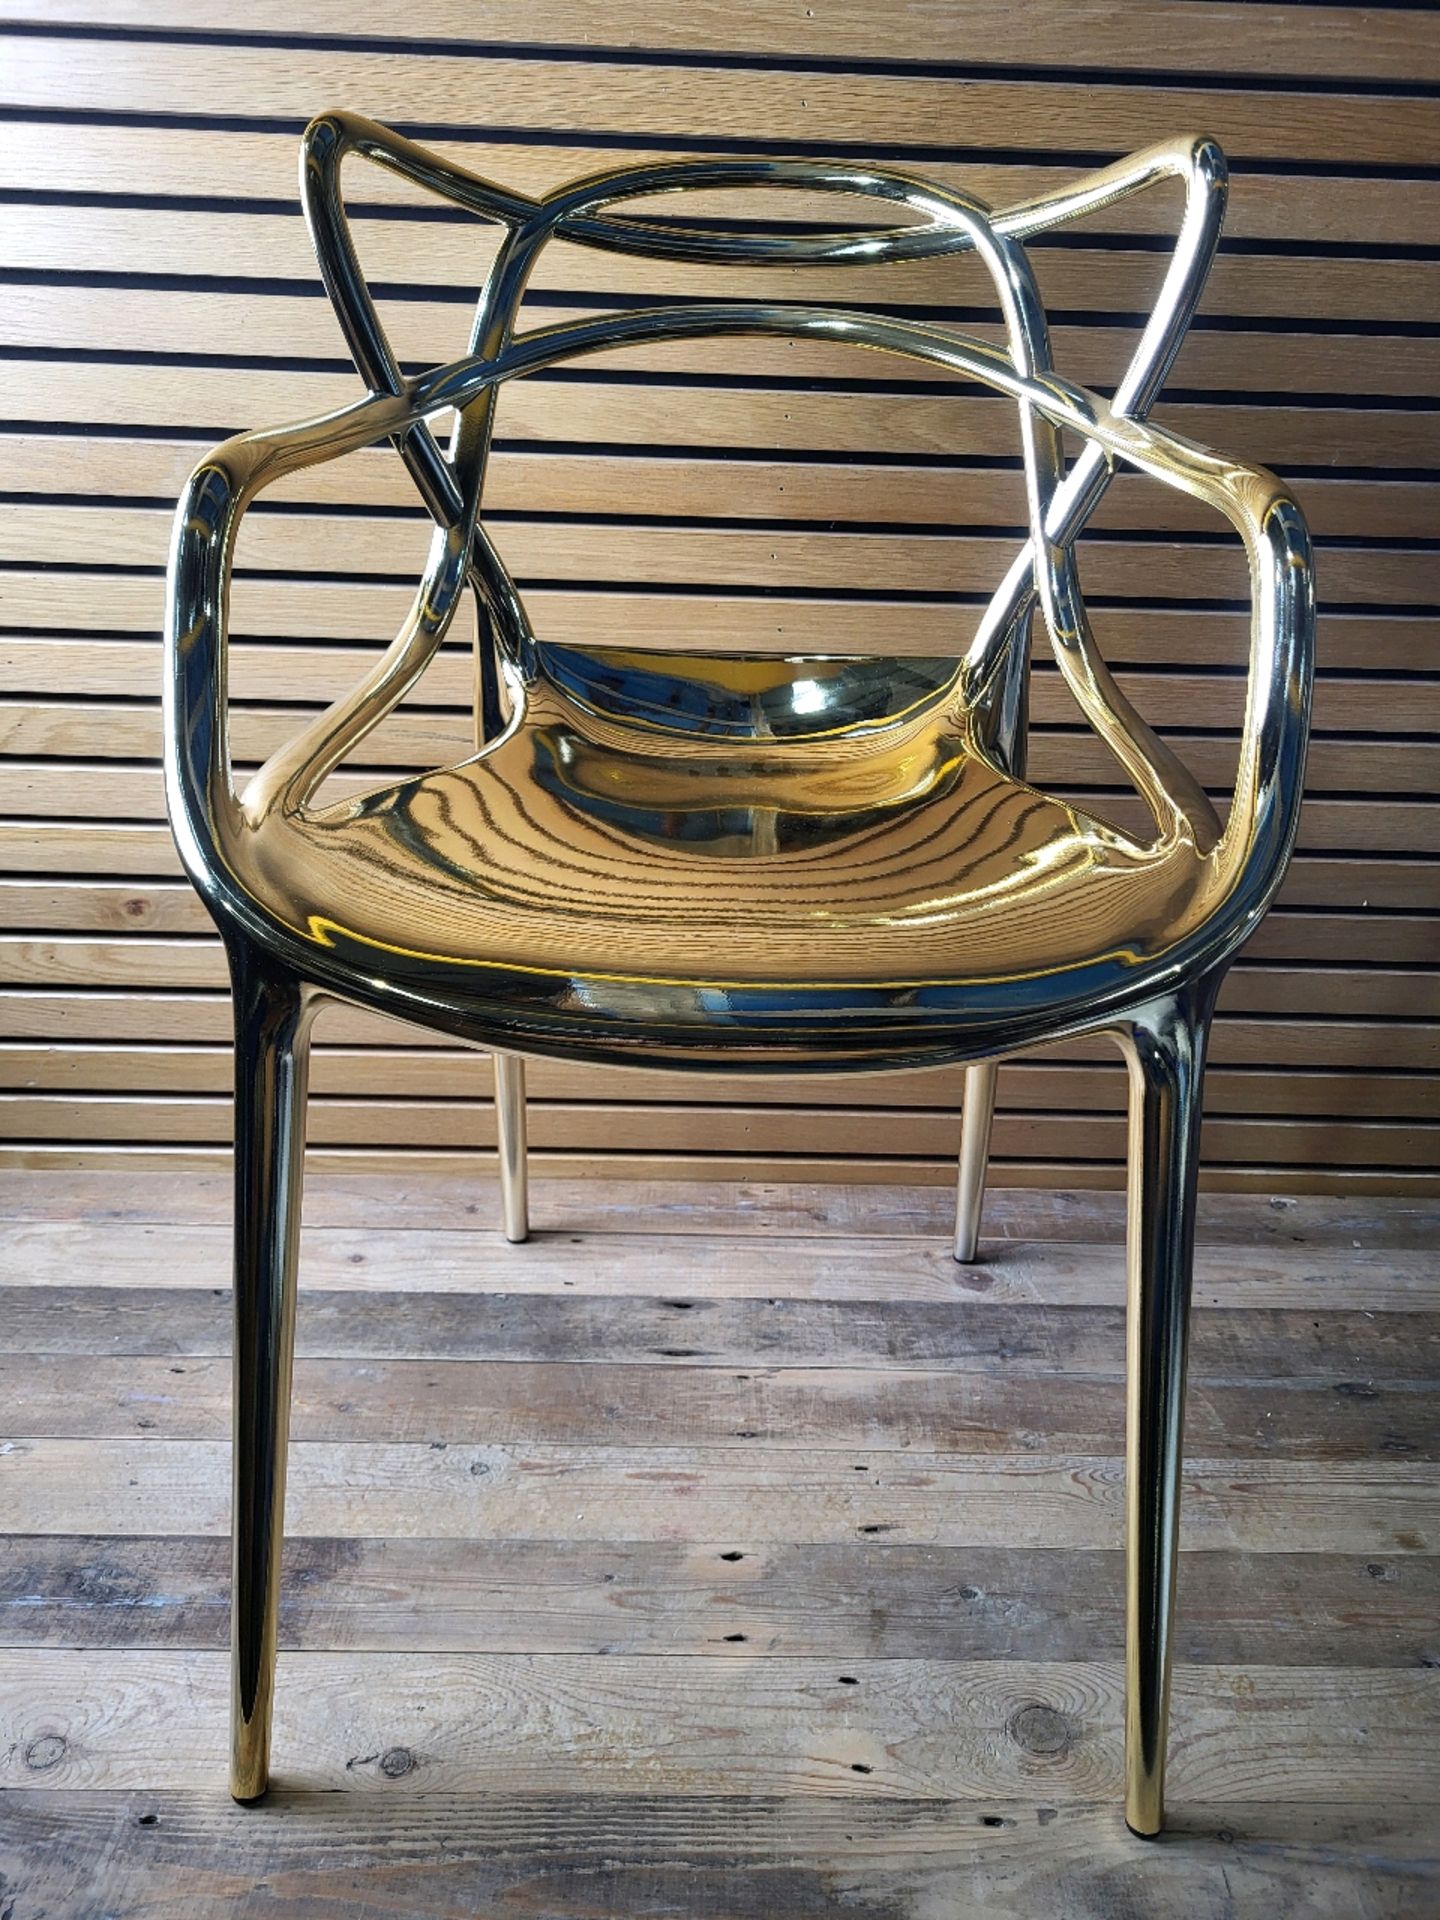 Kartell Masters Chairs - pair - in Gold designed by Philippe Starck & Eugeni Quitlett - Image 2 of 4